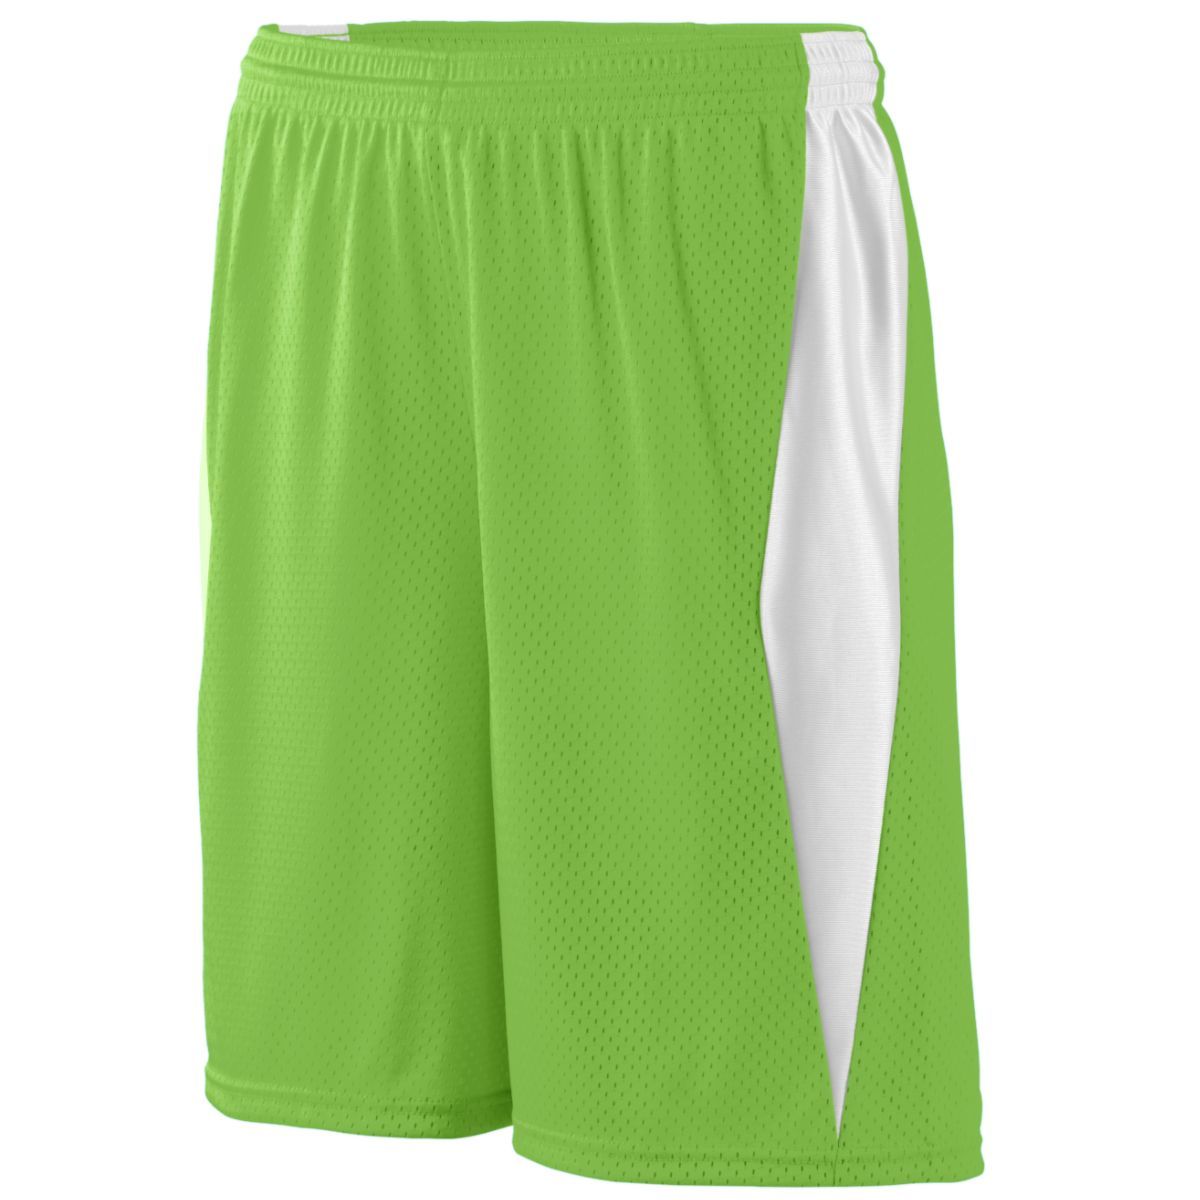 Augusta Sportswear Top Score Shorts in Lime/White  -Part of the Adult, Adult-Shorts, Augusta-Products, Lacrosse, All-Sports, All-Sports-1 product lines at KanaleyCreations.com